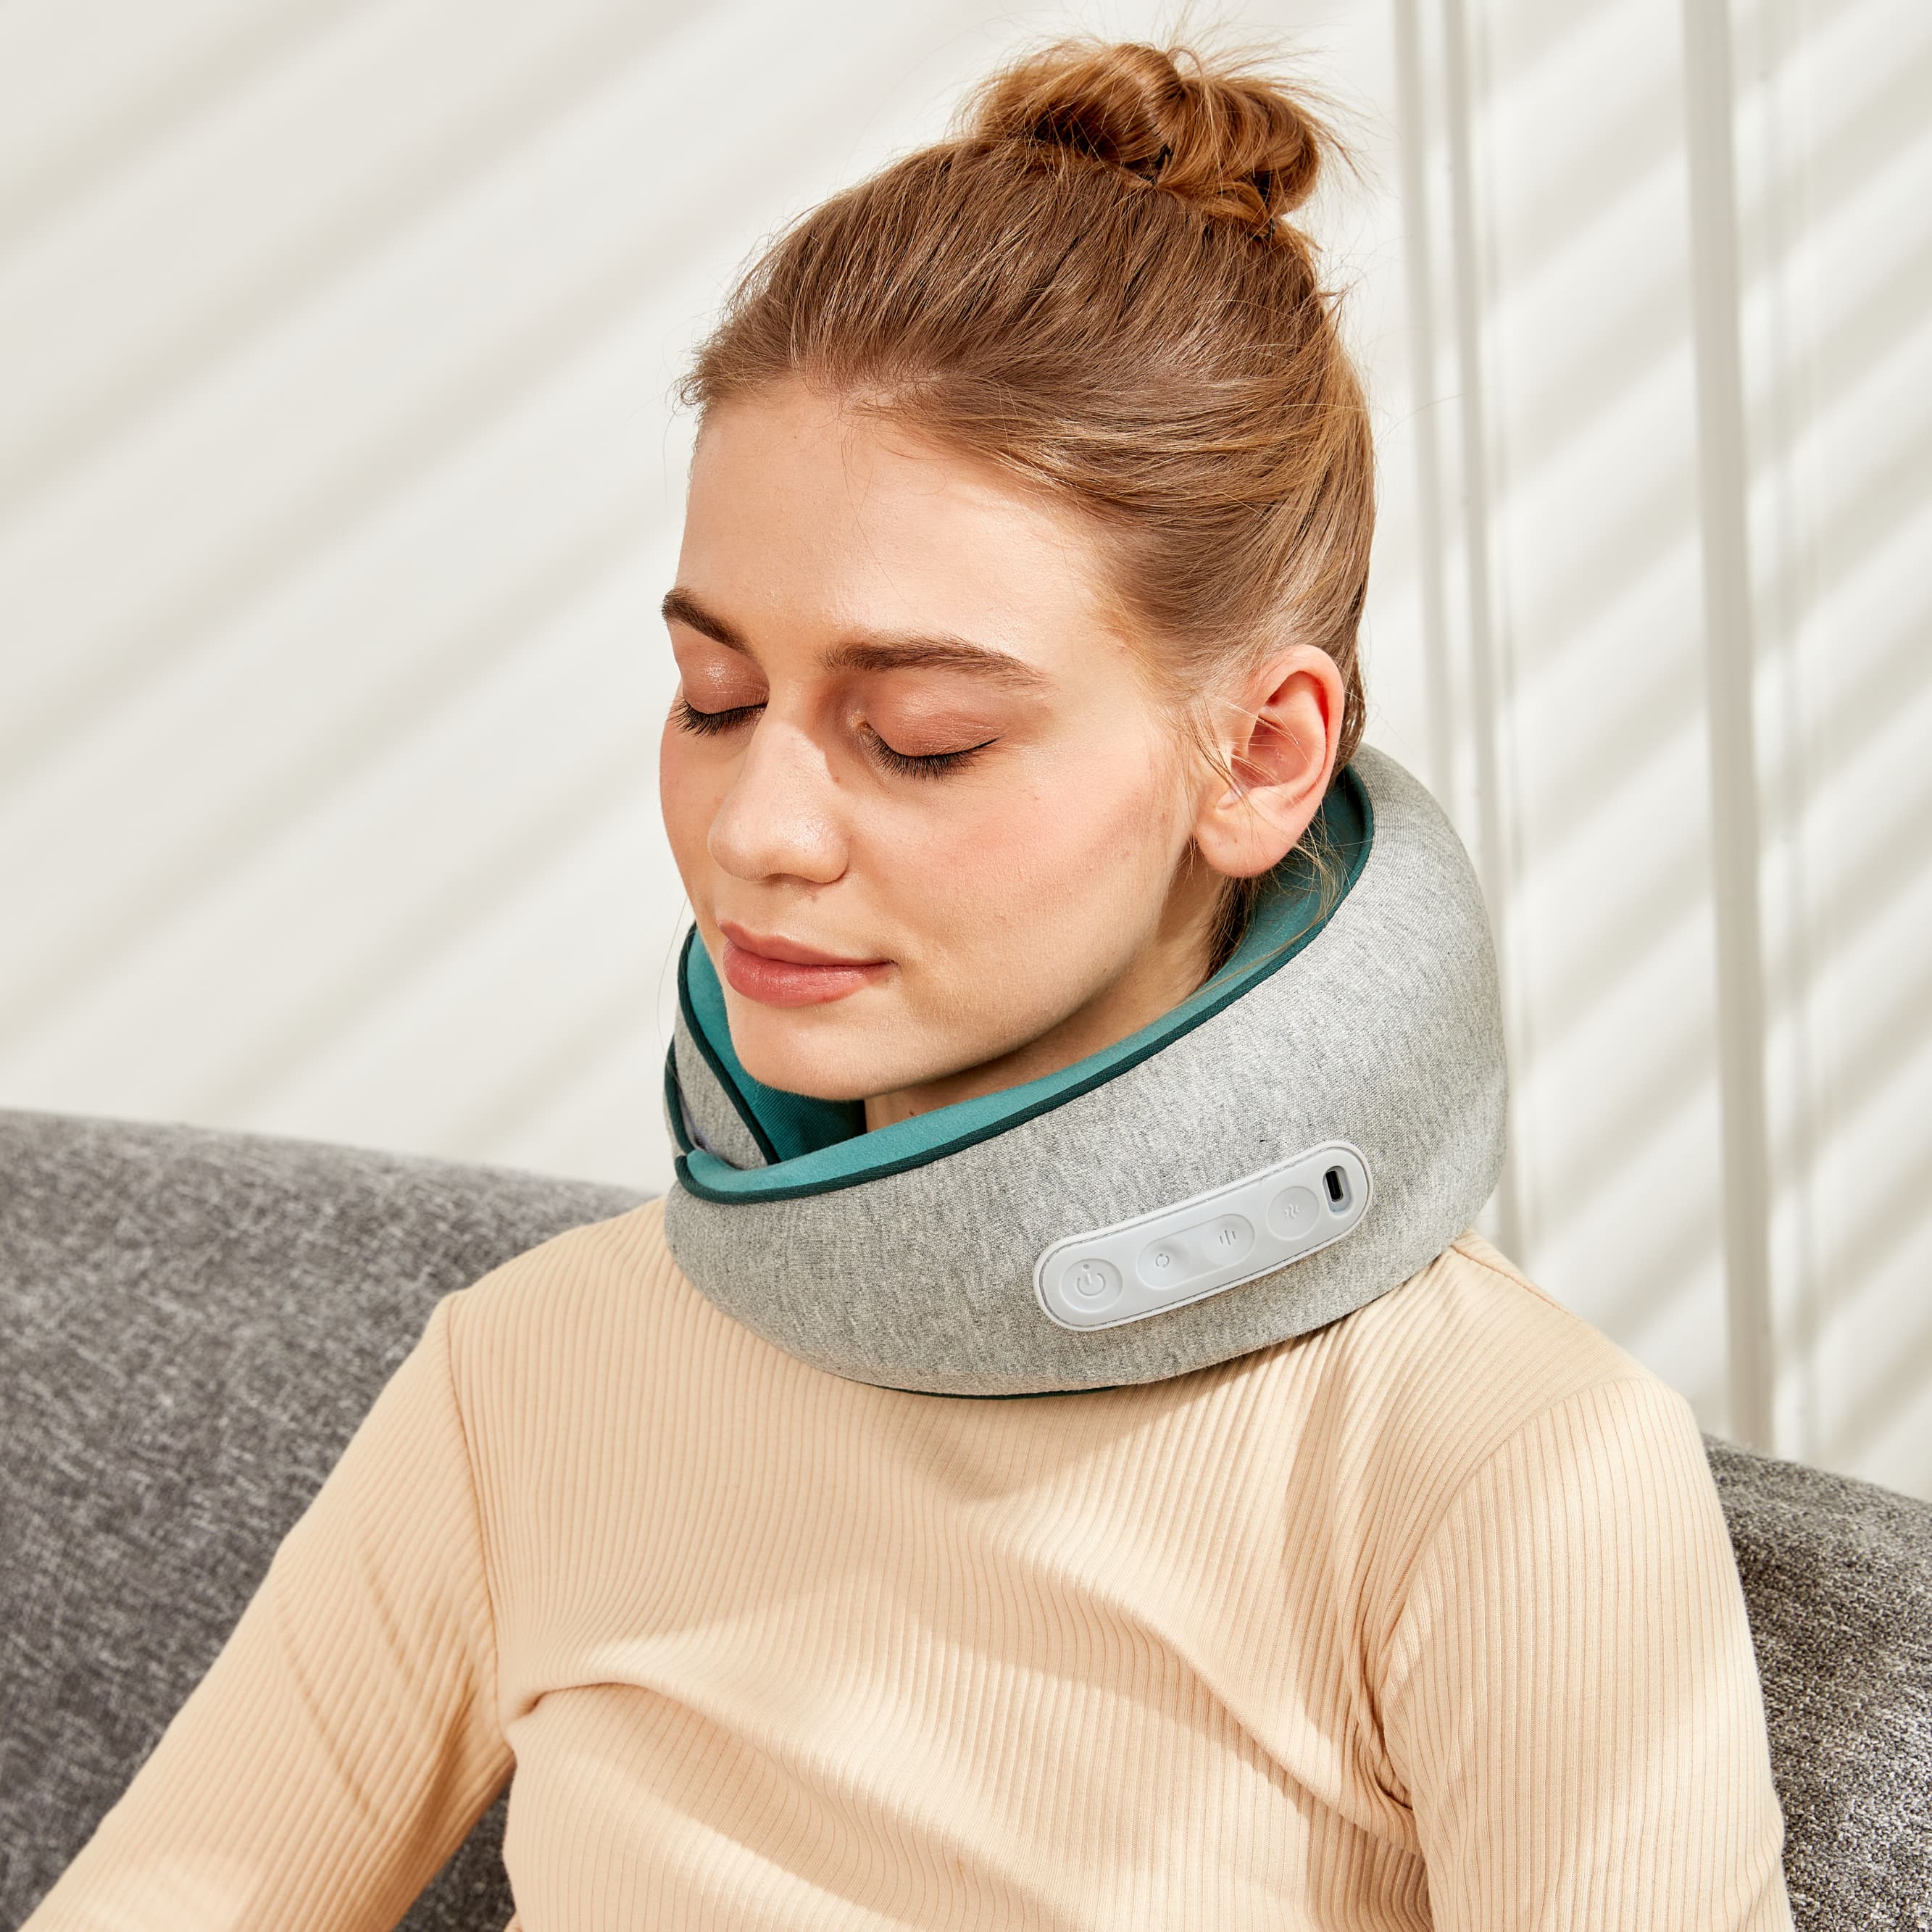 HAIDU Neck and shoulder massager  Cordless and Rechargeable – HAIDU ®